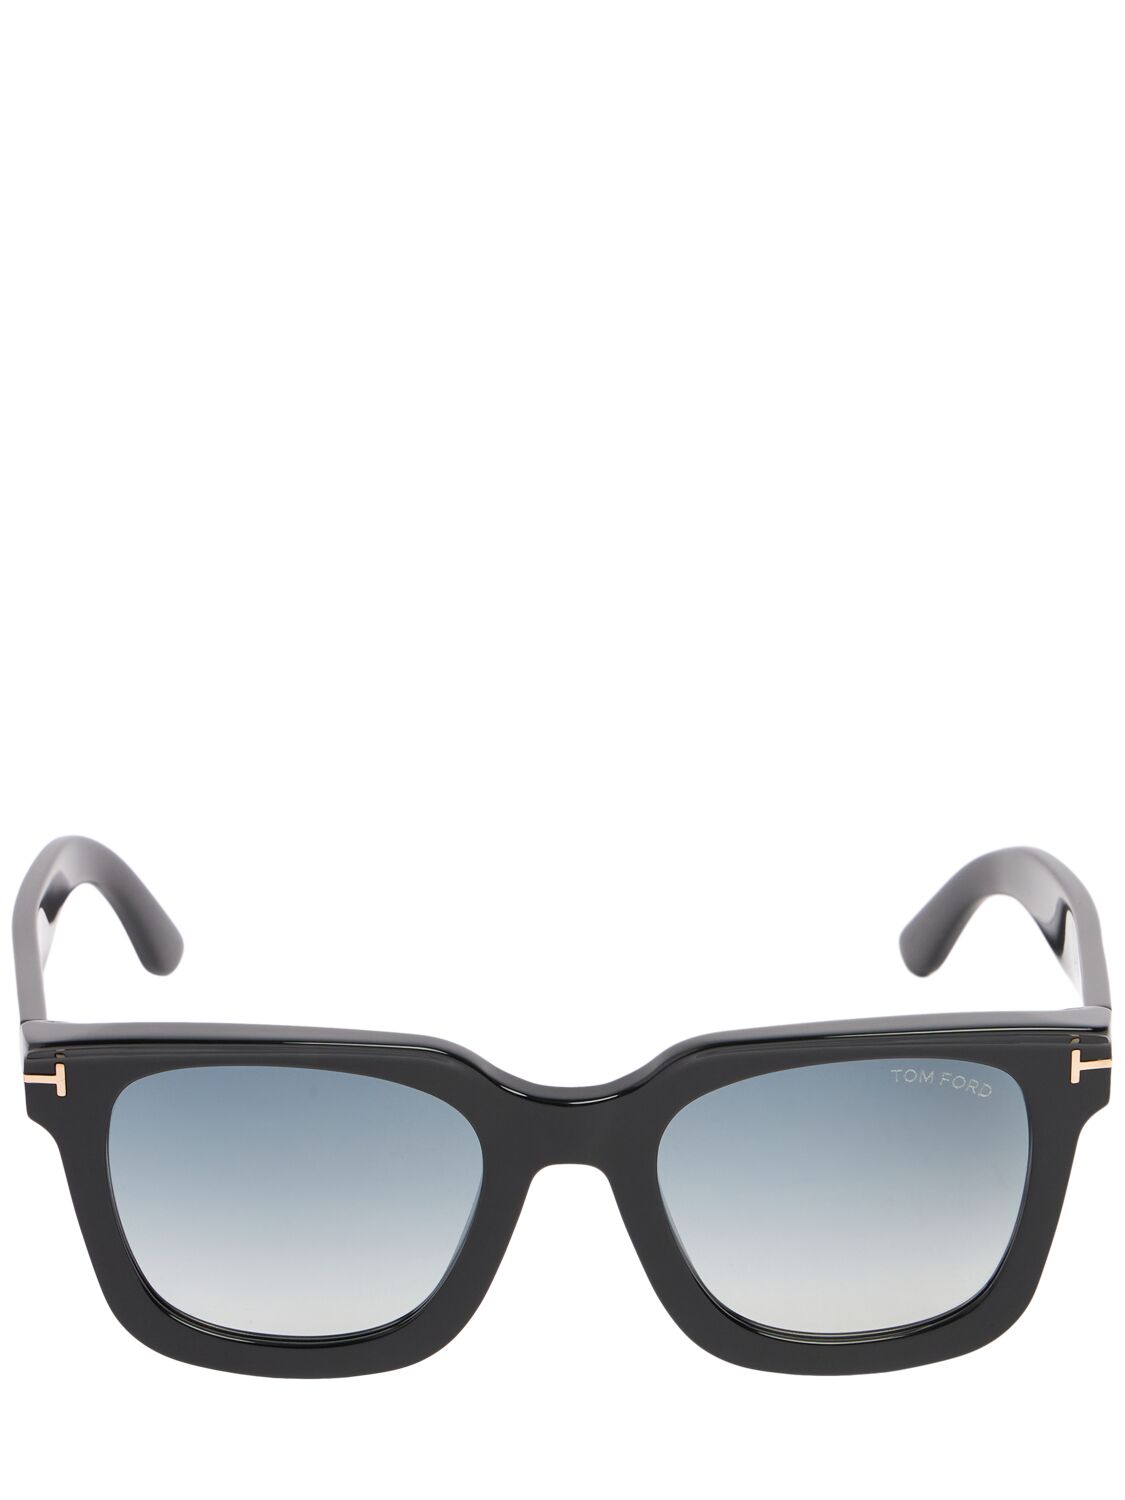 Tom Ford Leigh-02 Acetate Sunglasses In Black